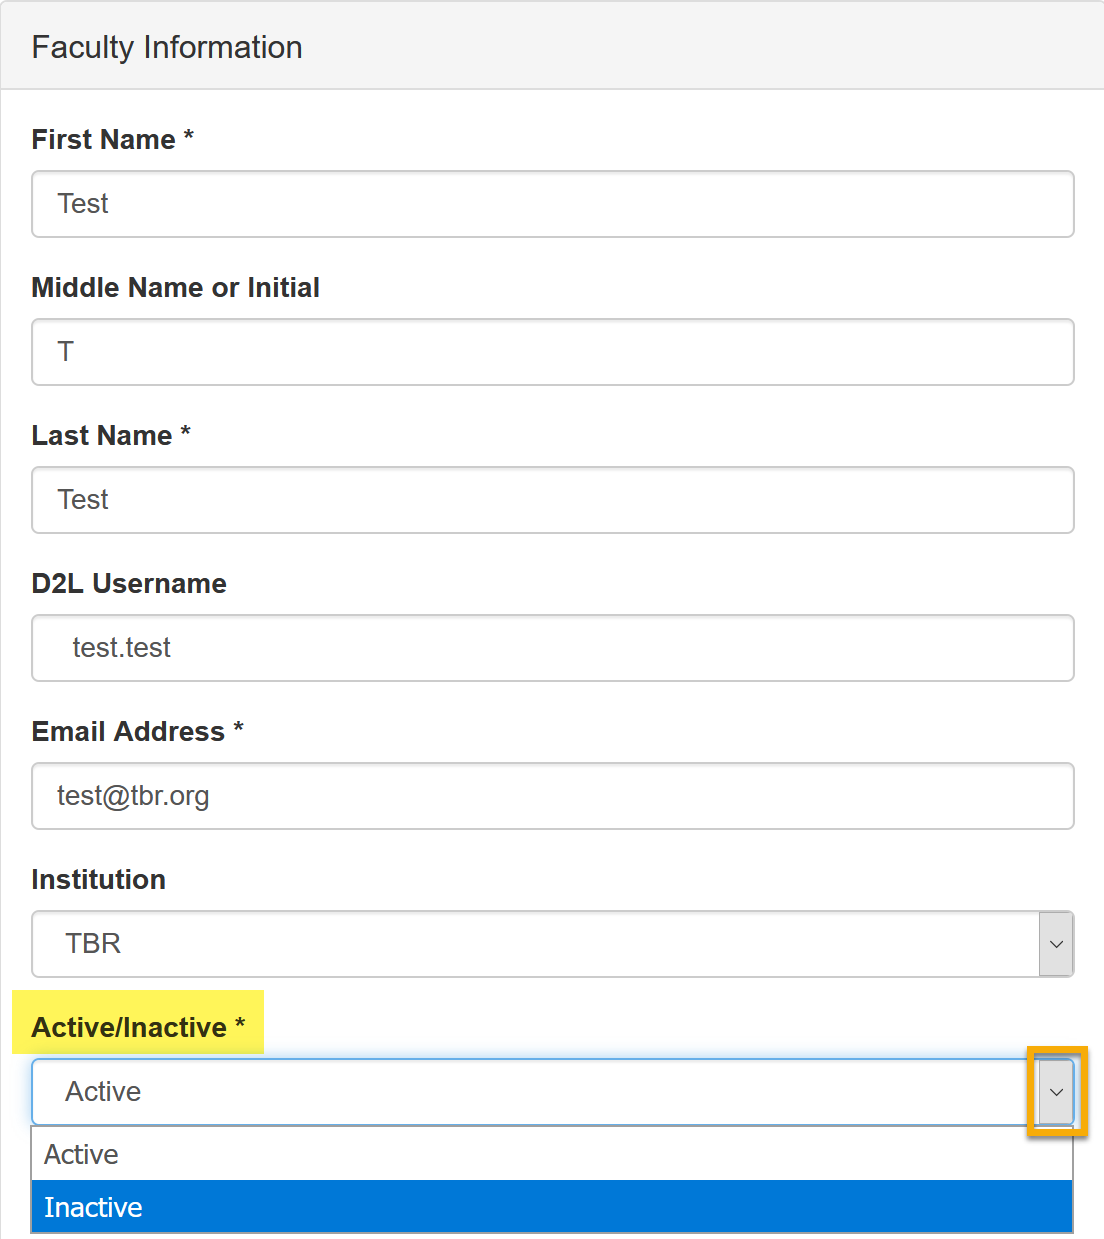 Screencast of Faculty Information fields that include First Name (required), Middle Name, Last Name (required), D2L Username, Email Address (required), and Institution.